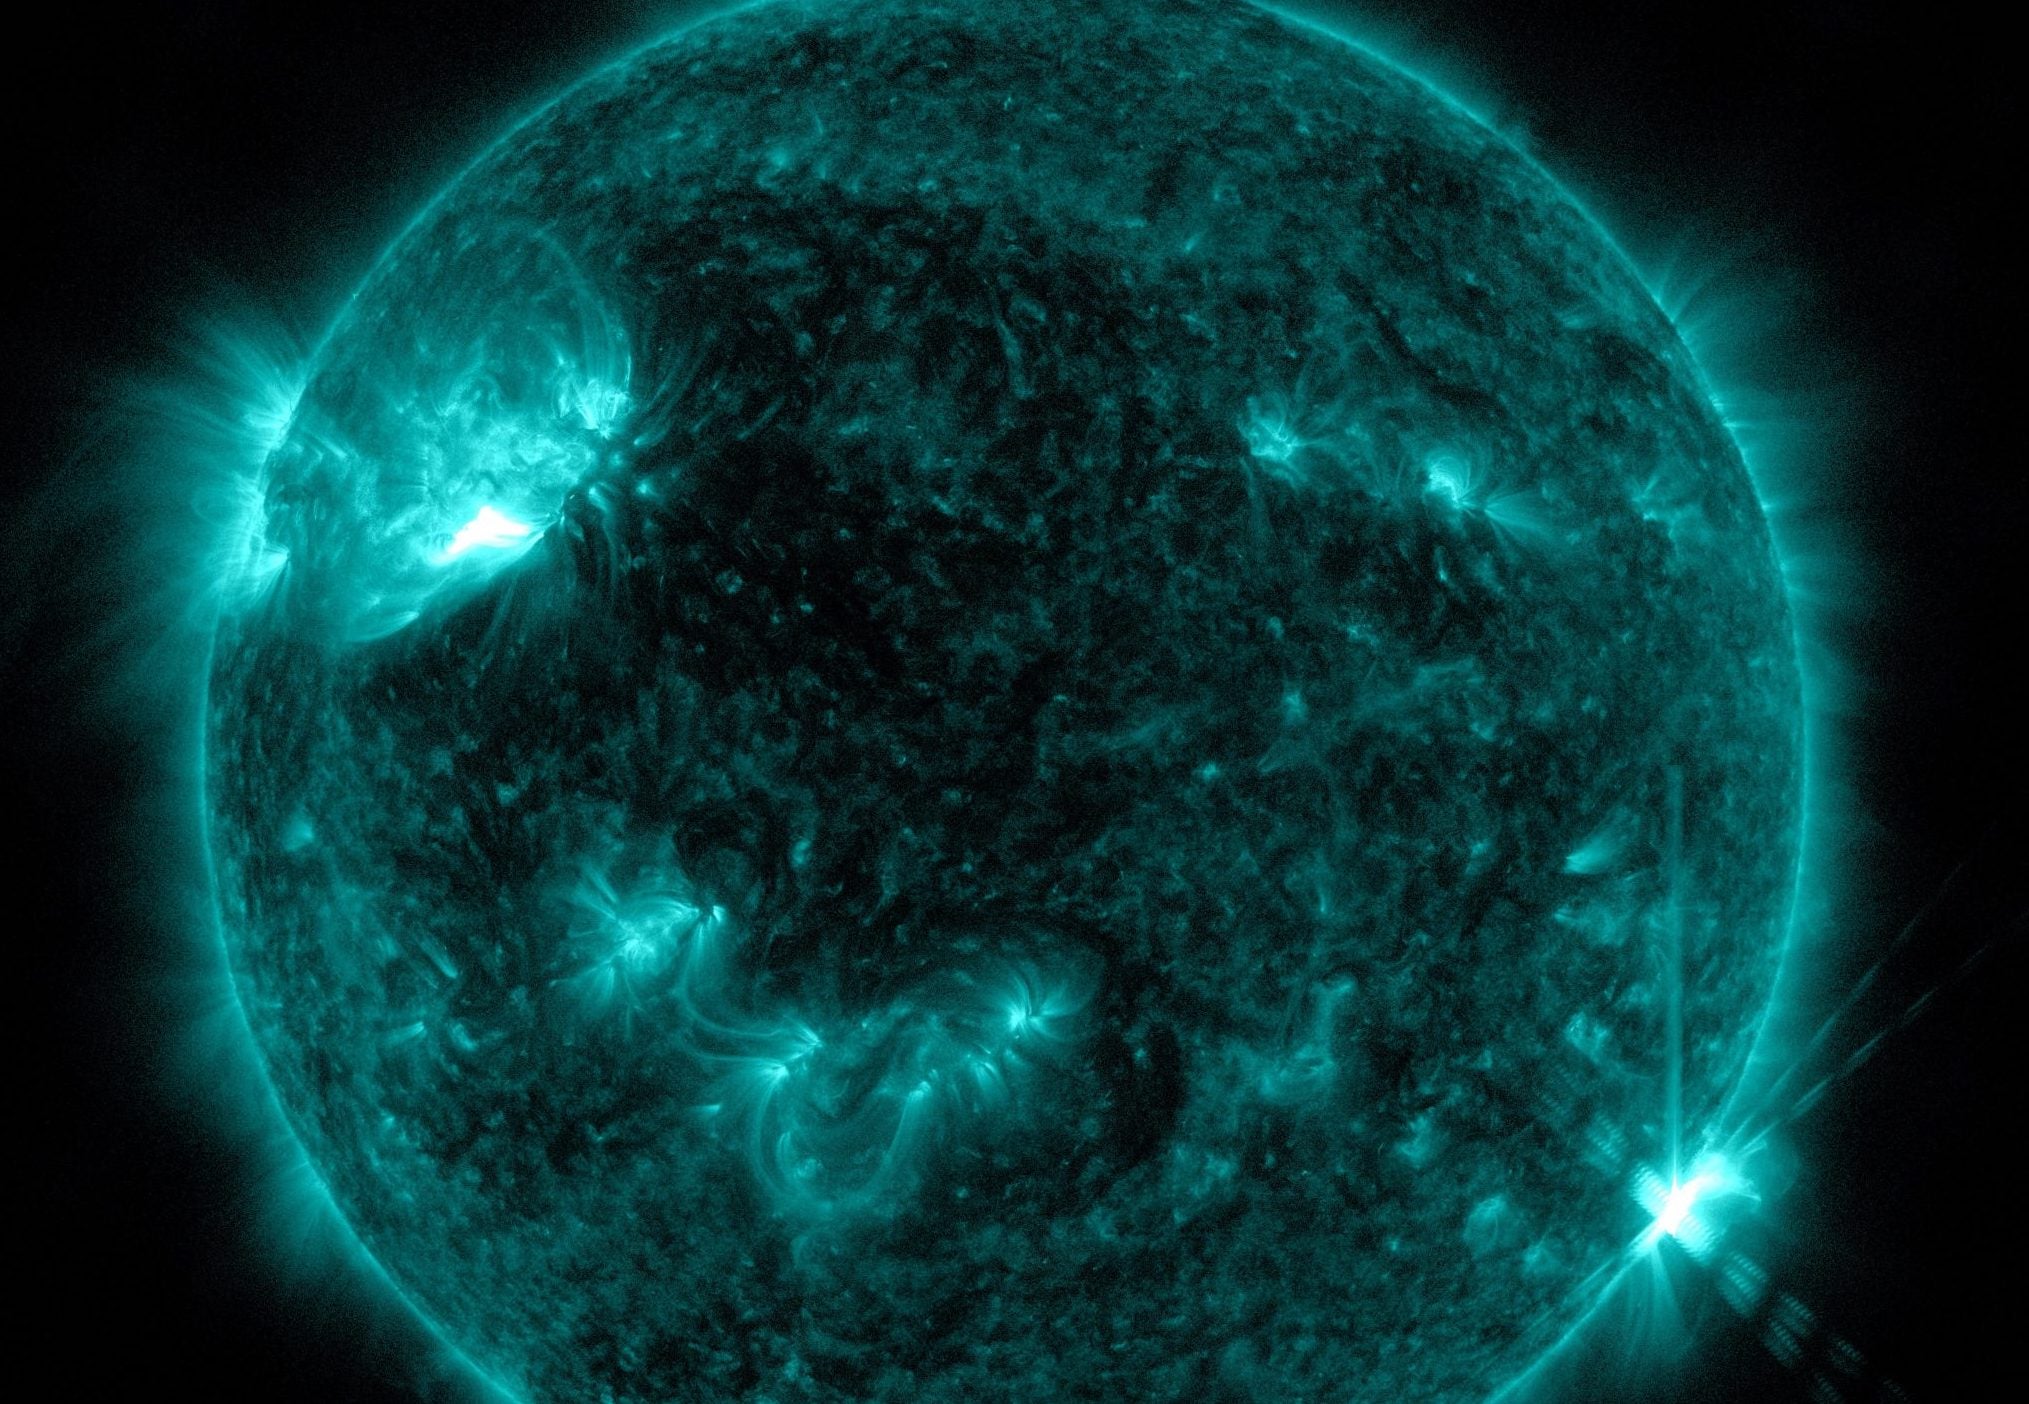 NASA’s Solar Dynamics Observatory captured this image of a solar flare – as seen in the bright flash in the lower right portion of the image